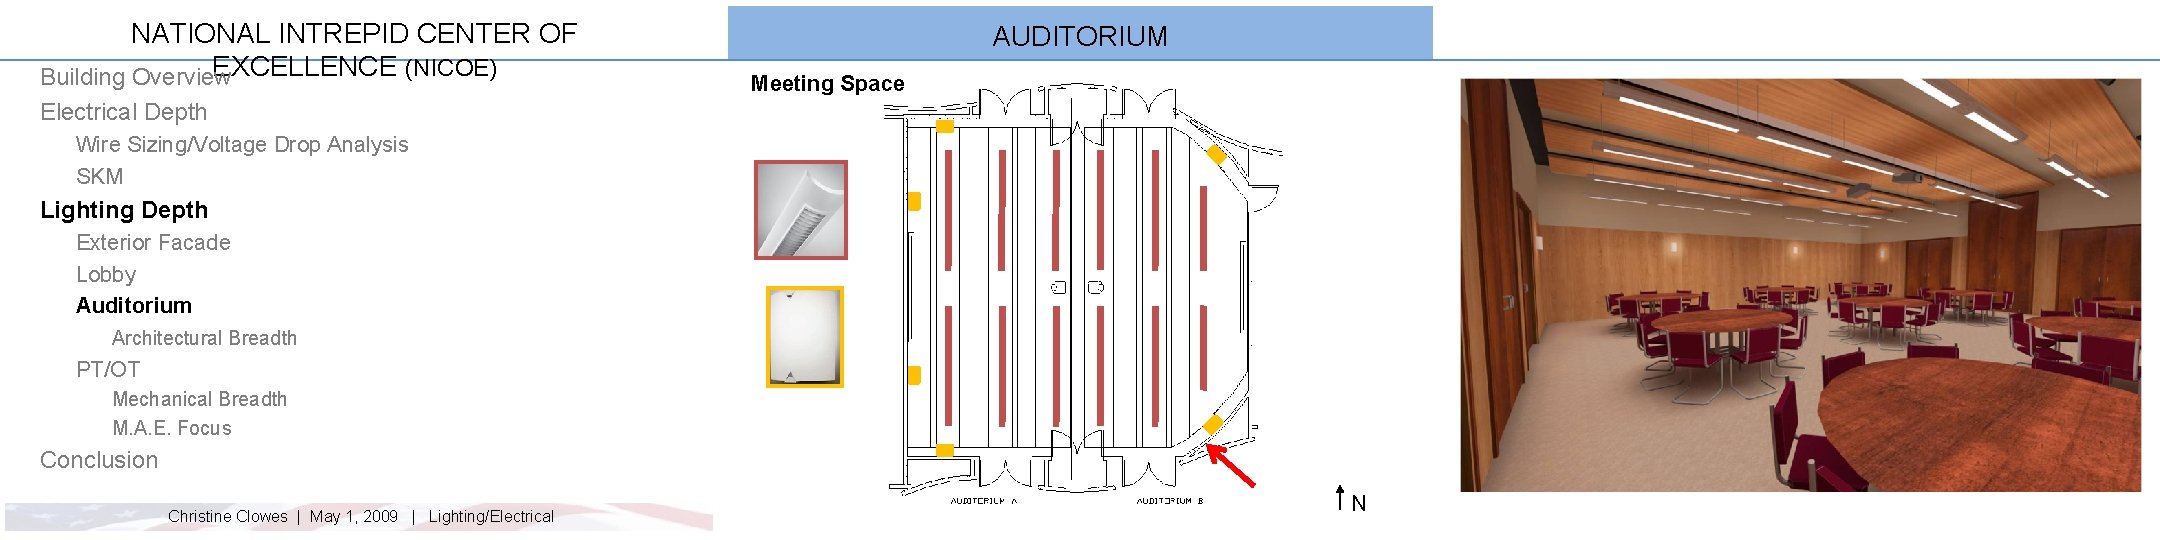 NATIONAL INTREPID CENTER OF EXCELLENCE (NICOE) Building Overview AUDITORIUM Meeting Space Electrical Depth Wire